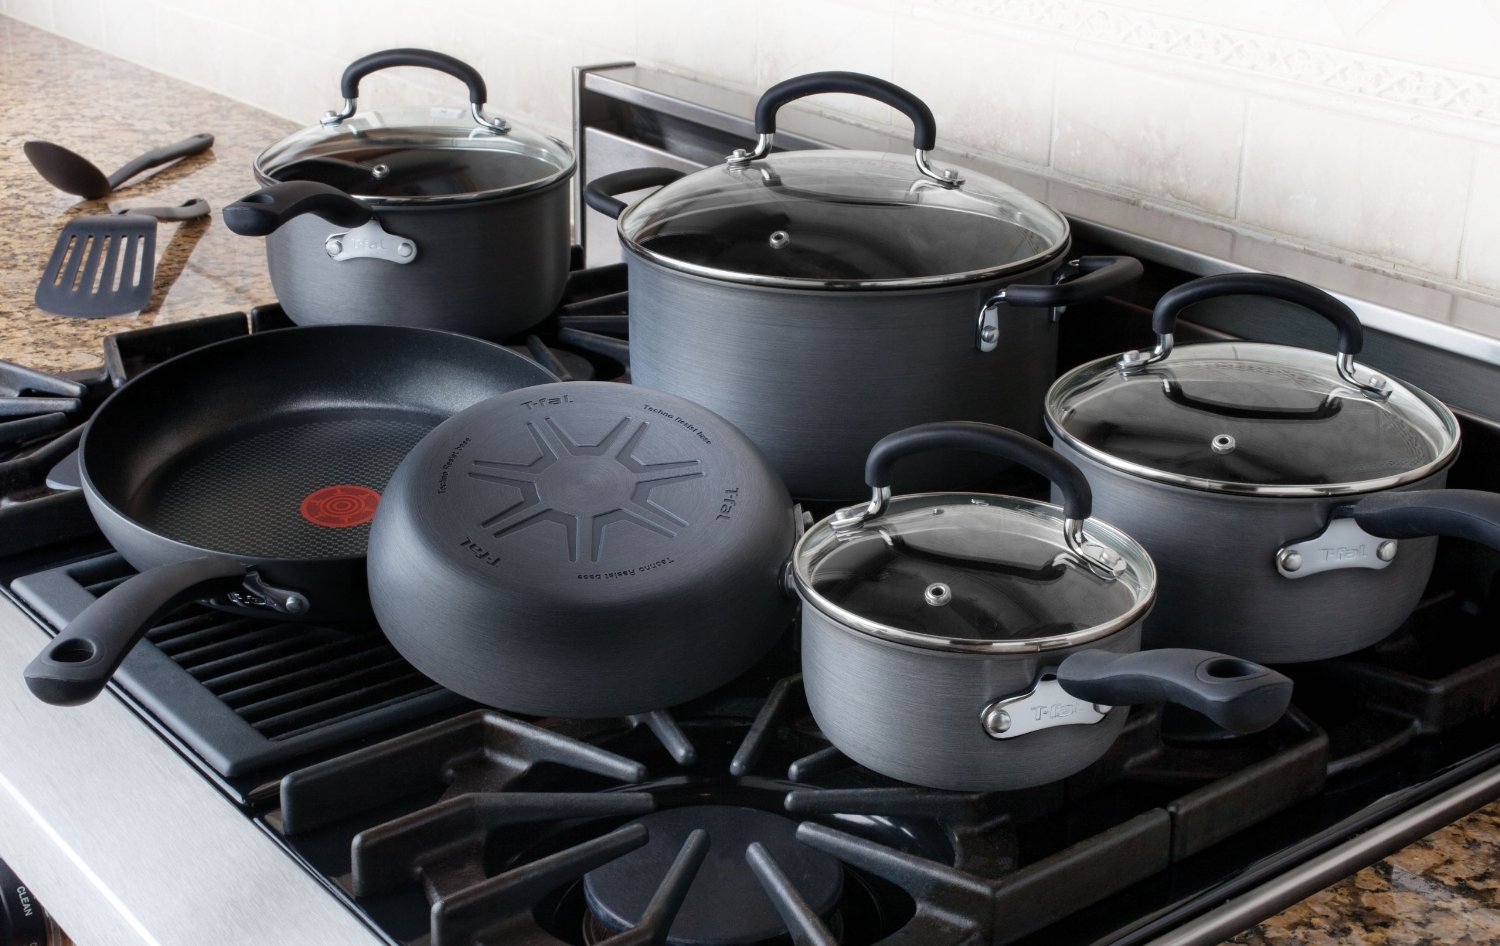 T-fal Ultimate Hard Anodized Nonstick 17-Piece Kitchen Cookware